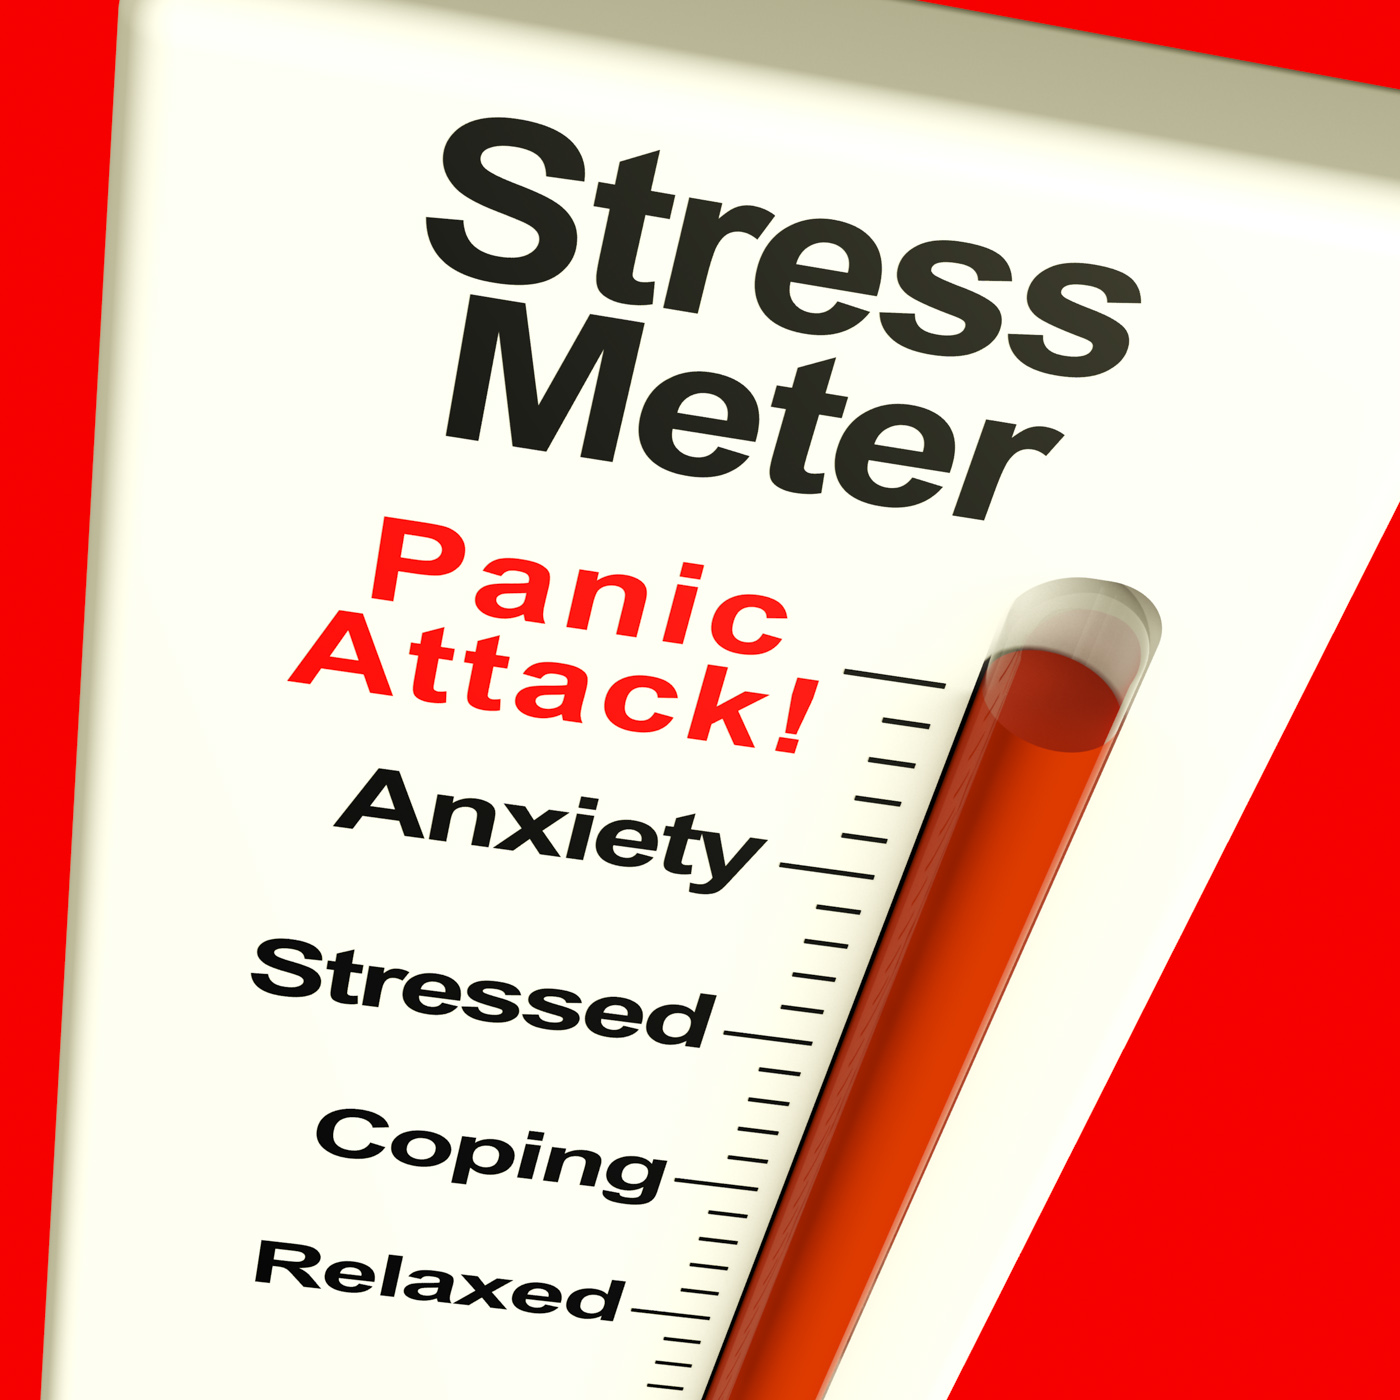 Stress meter showing panic attack from stress or worry photo